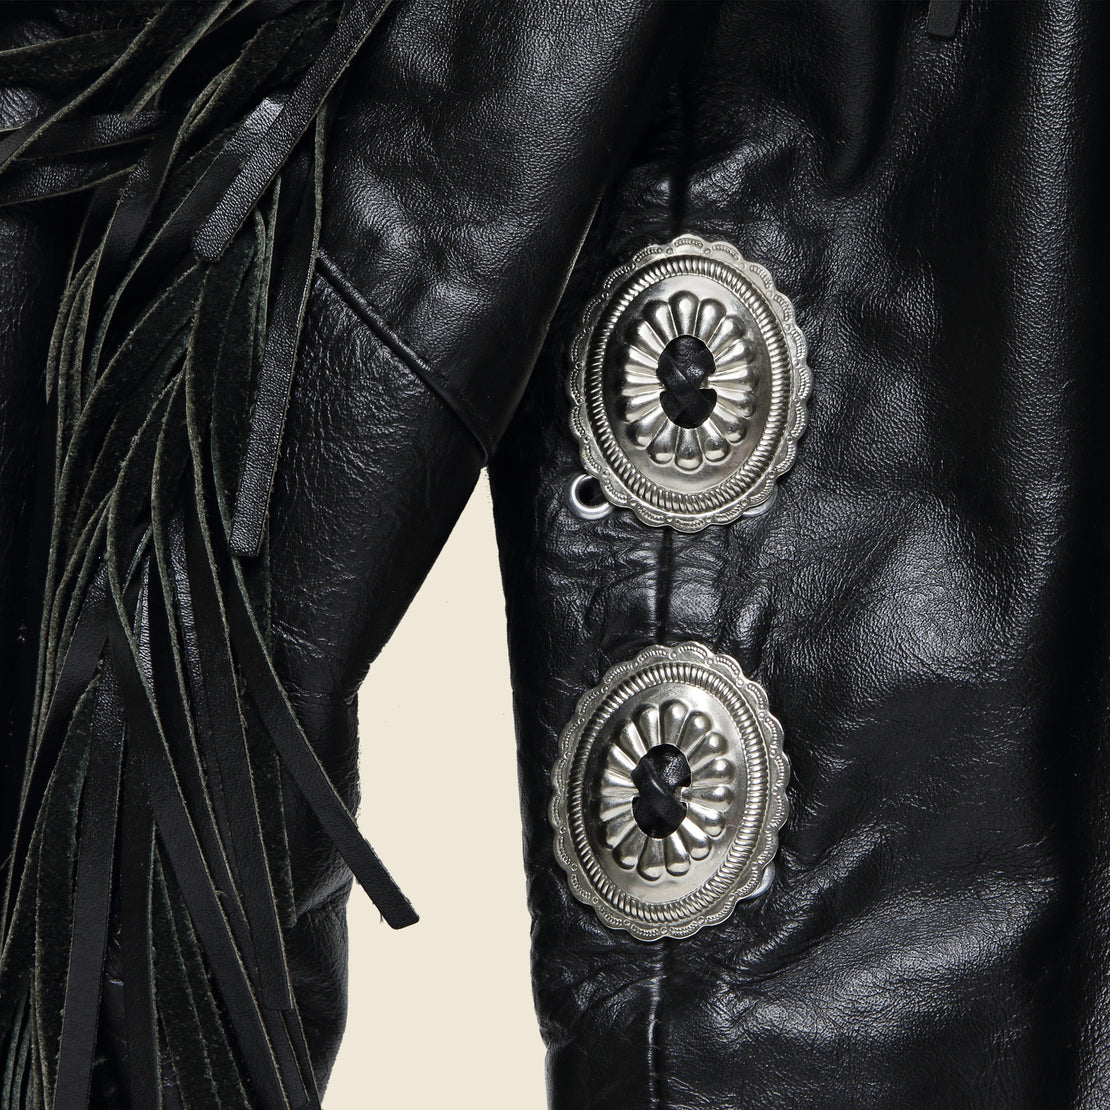 Leather Rider Concho & Tassle Biker Jacket - Black - Vintage - STAG Provisions - W - One & Done - Apparel